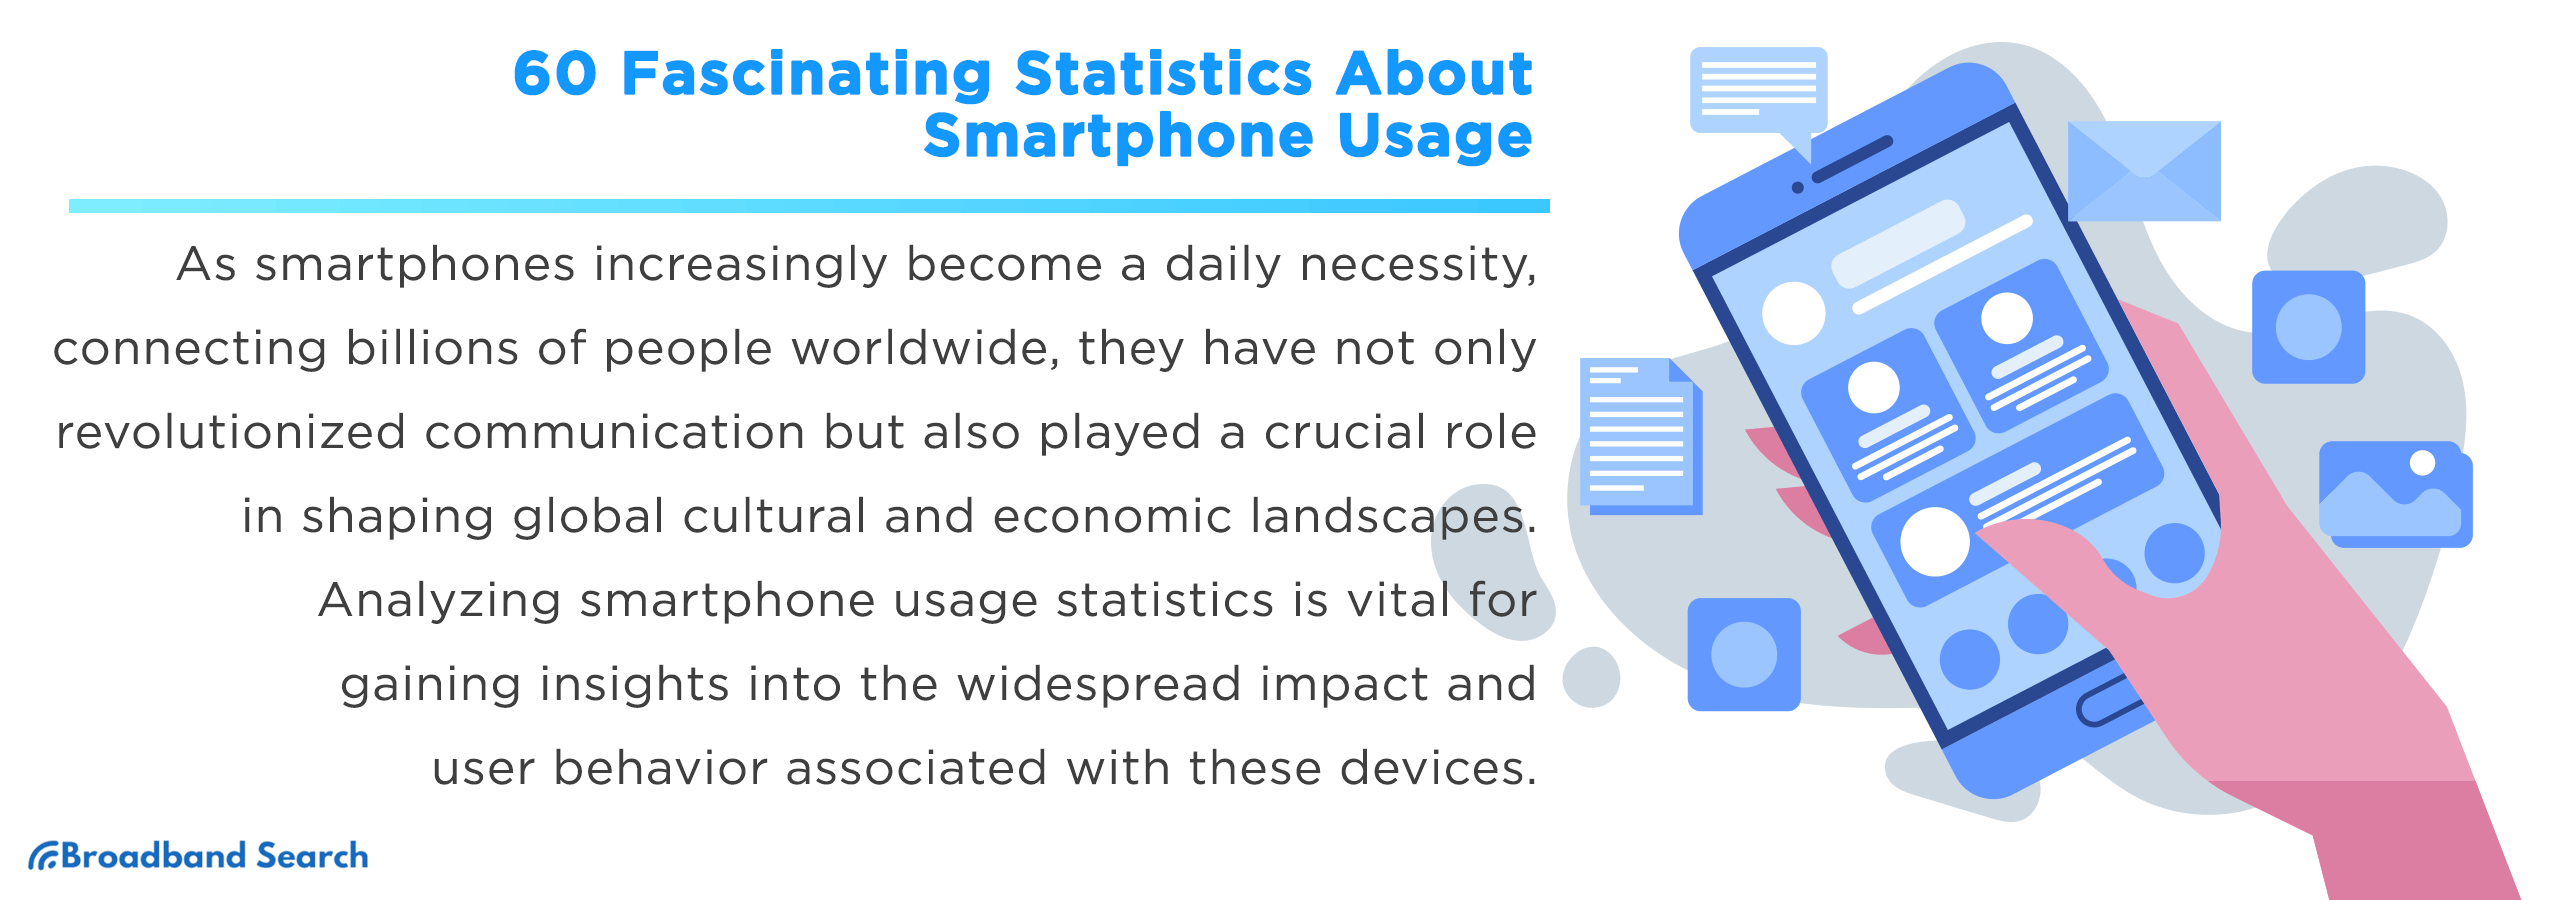 60 Fascinating Statistics About Smartphone Usage